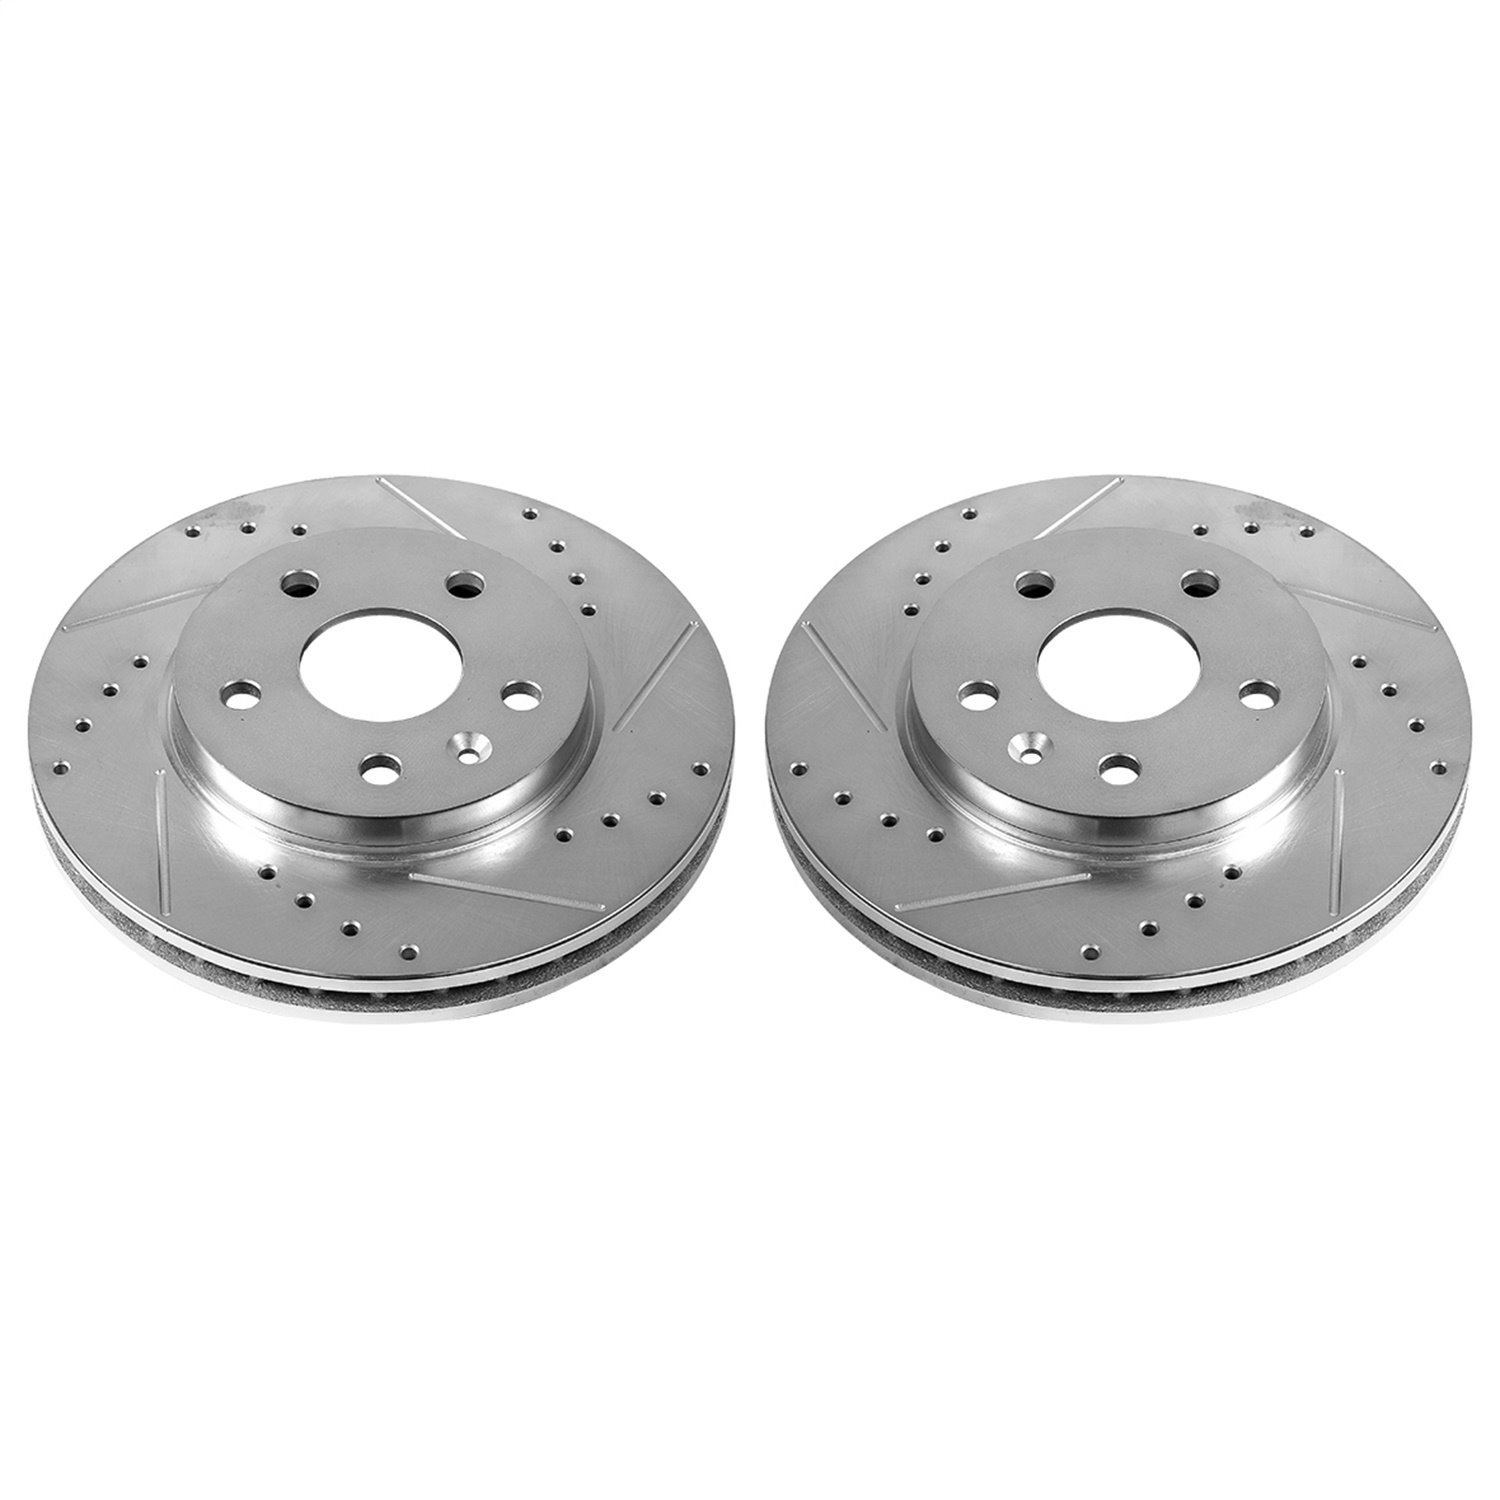 Drilled And Slotted Front Brake Rotors Fits Select 2011-2016 Buick, Chevy, Saab Models